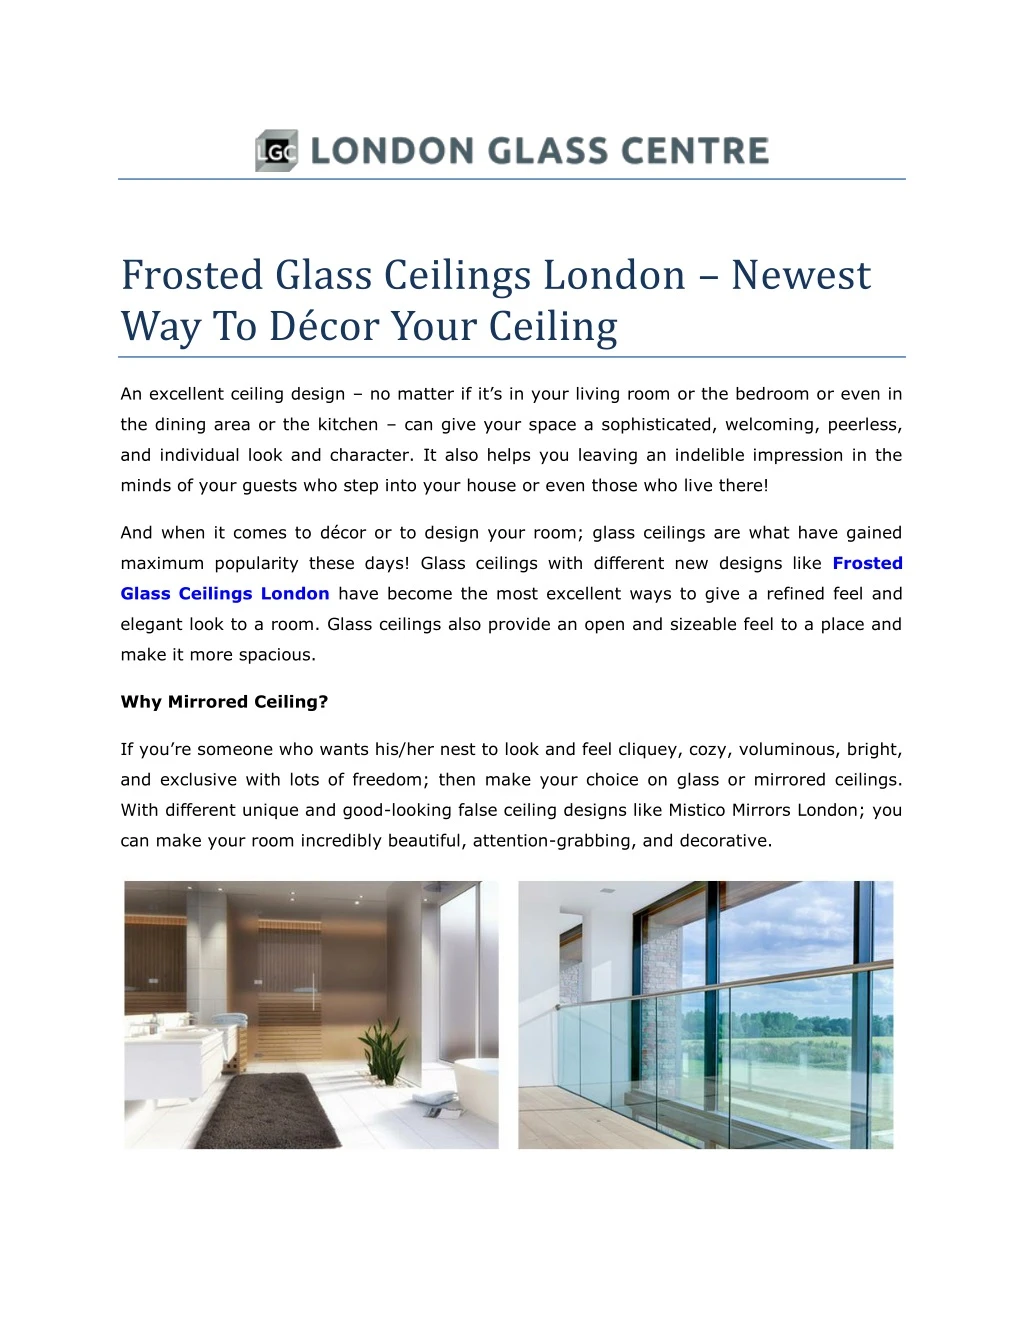 frosted glass ceilings london newest